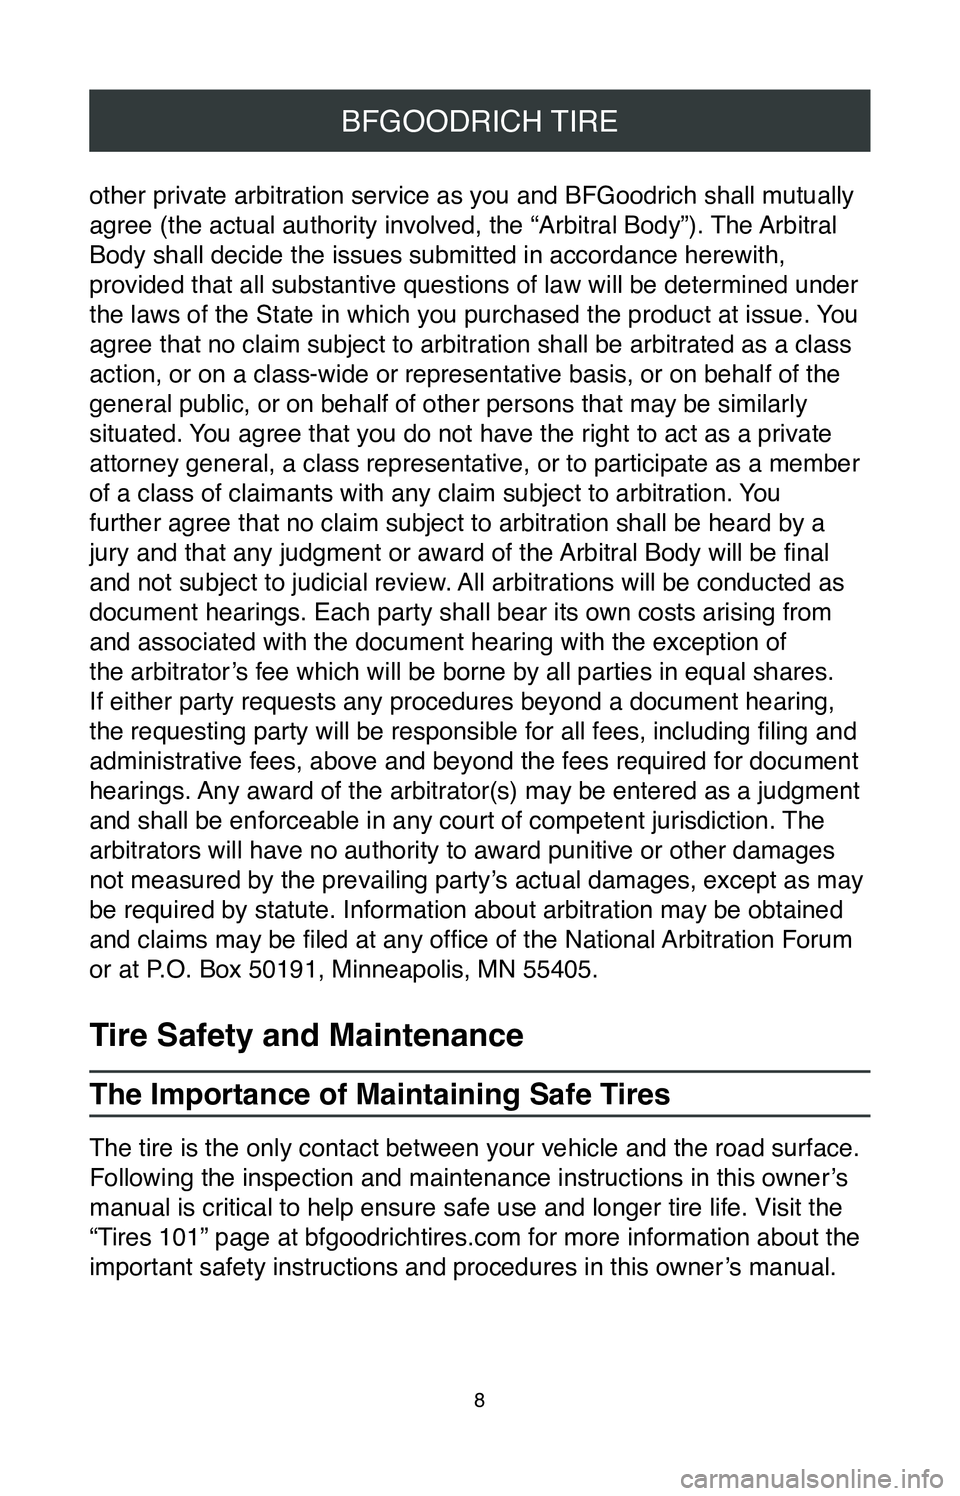 TOYOTA TACOMA 2020  Warranties & Maintenance Guides (in English) 8
BFGOODRICH TIRE
other private arbitration service as you and BFGoodrich shall mutually 
agree (the actual authority involved, the “Arbitral Body”). The Arbitral 
Body shall decide the issues sub